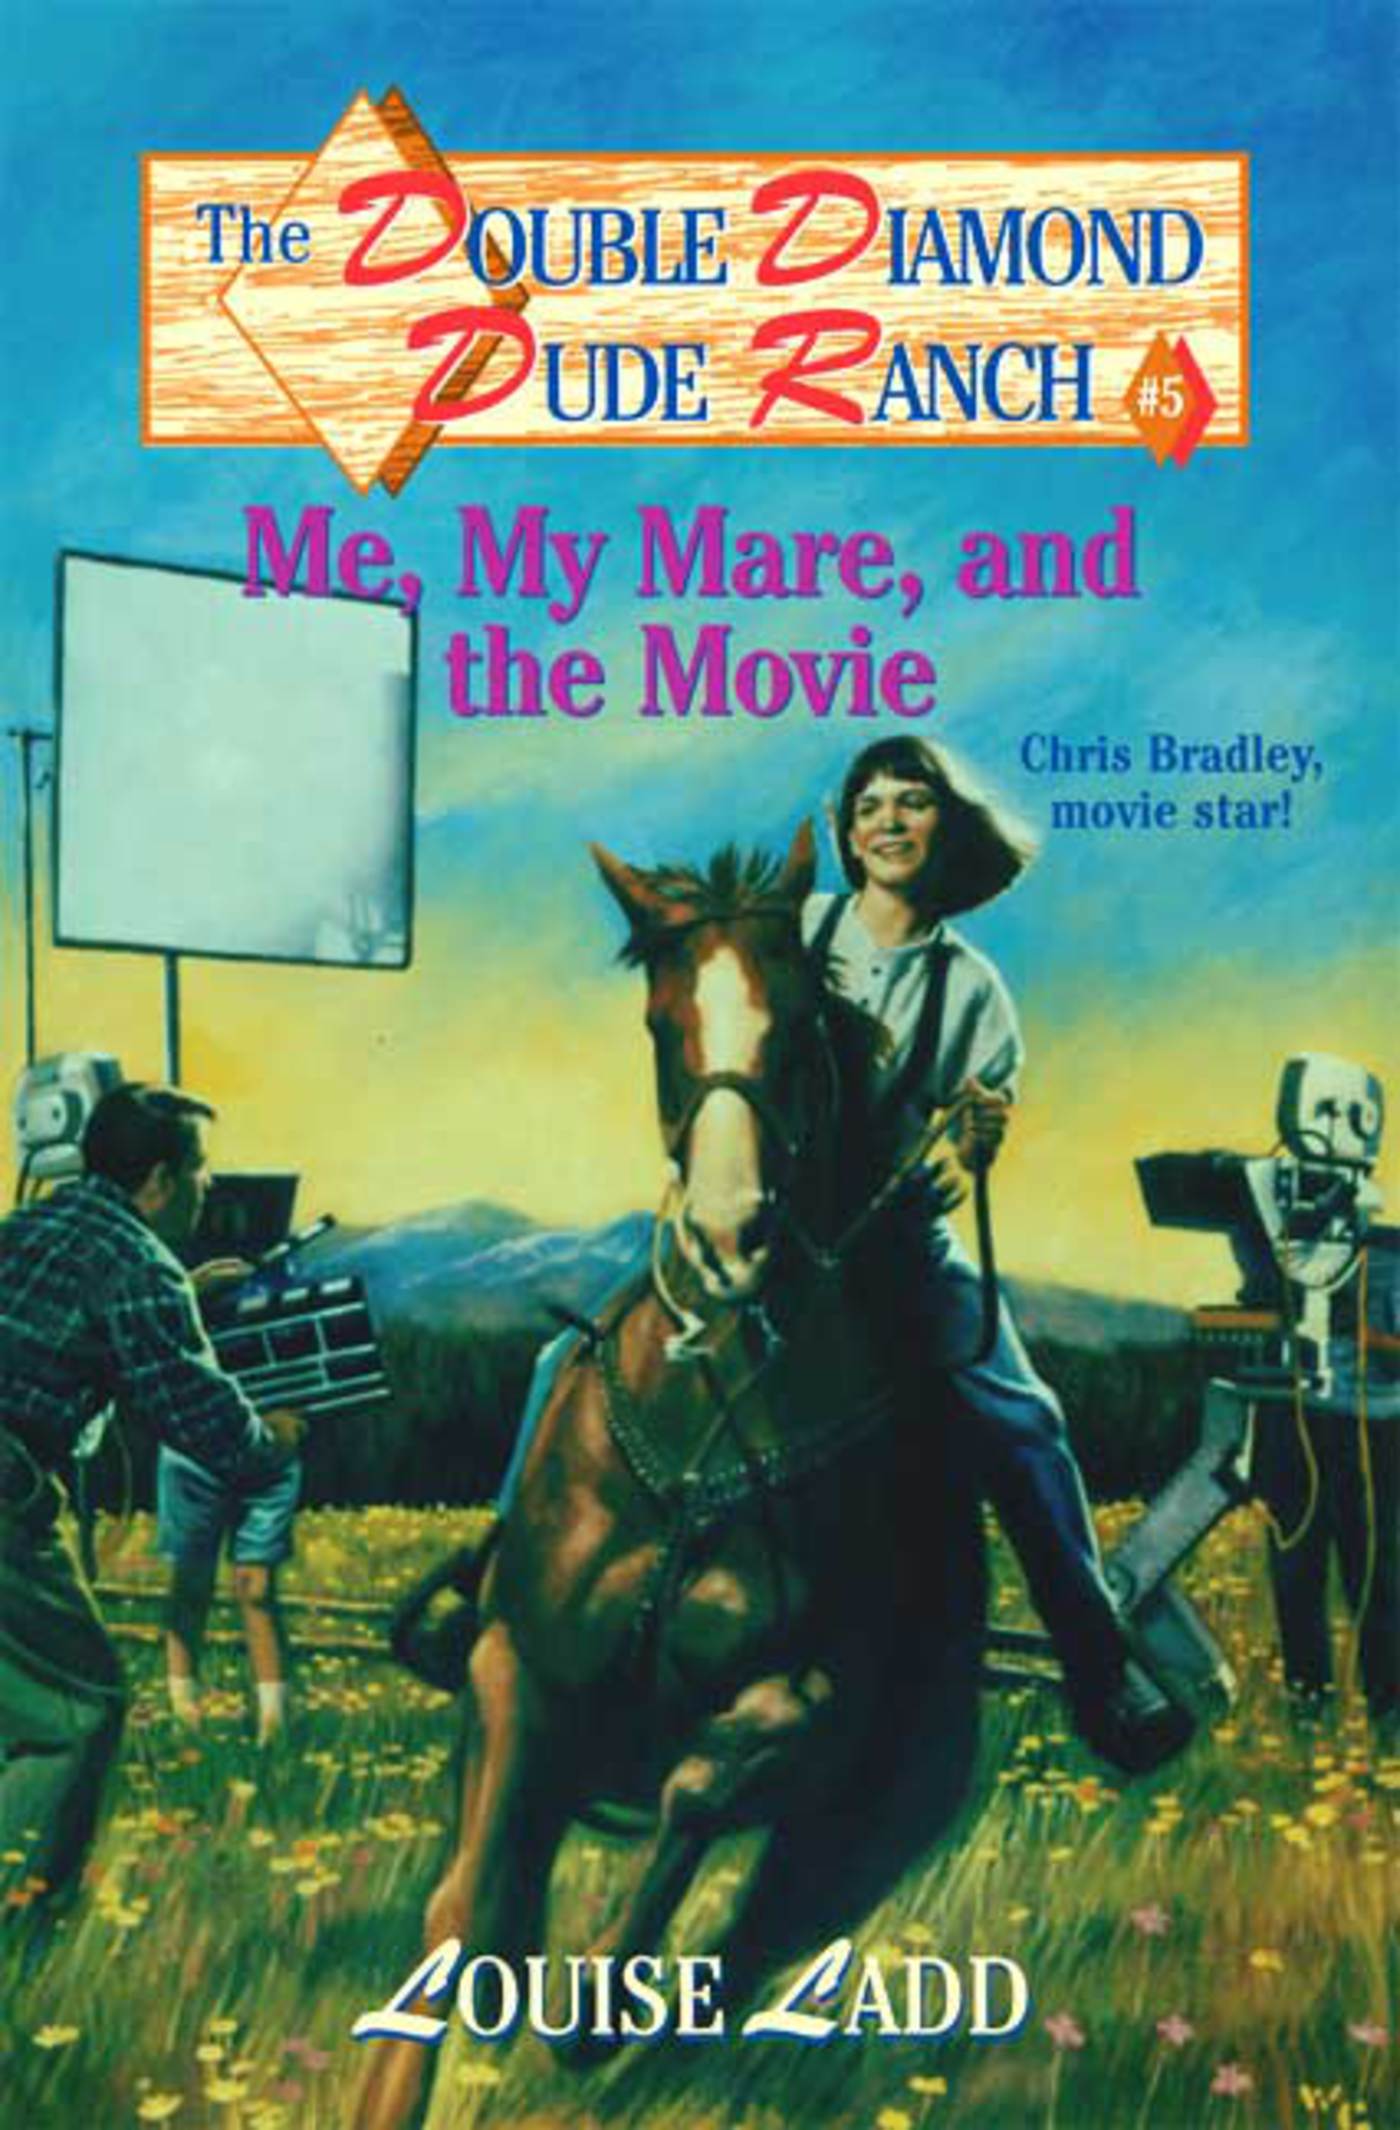 Double Diamond Dude Ranch #5 - Me, My Mare, and the Movie : Chris Bradley, movie star! by Louise Ladd